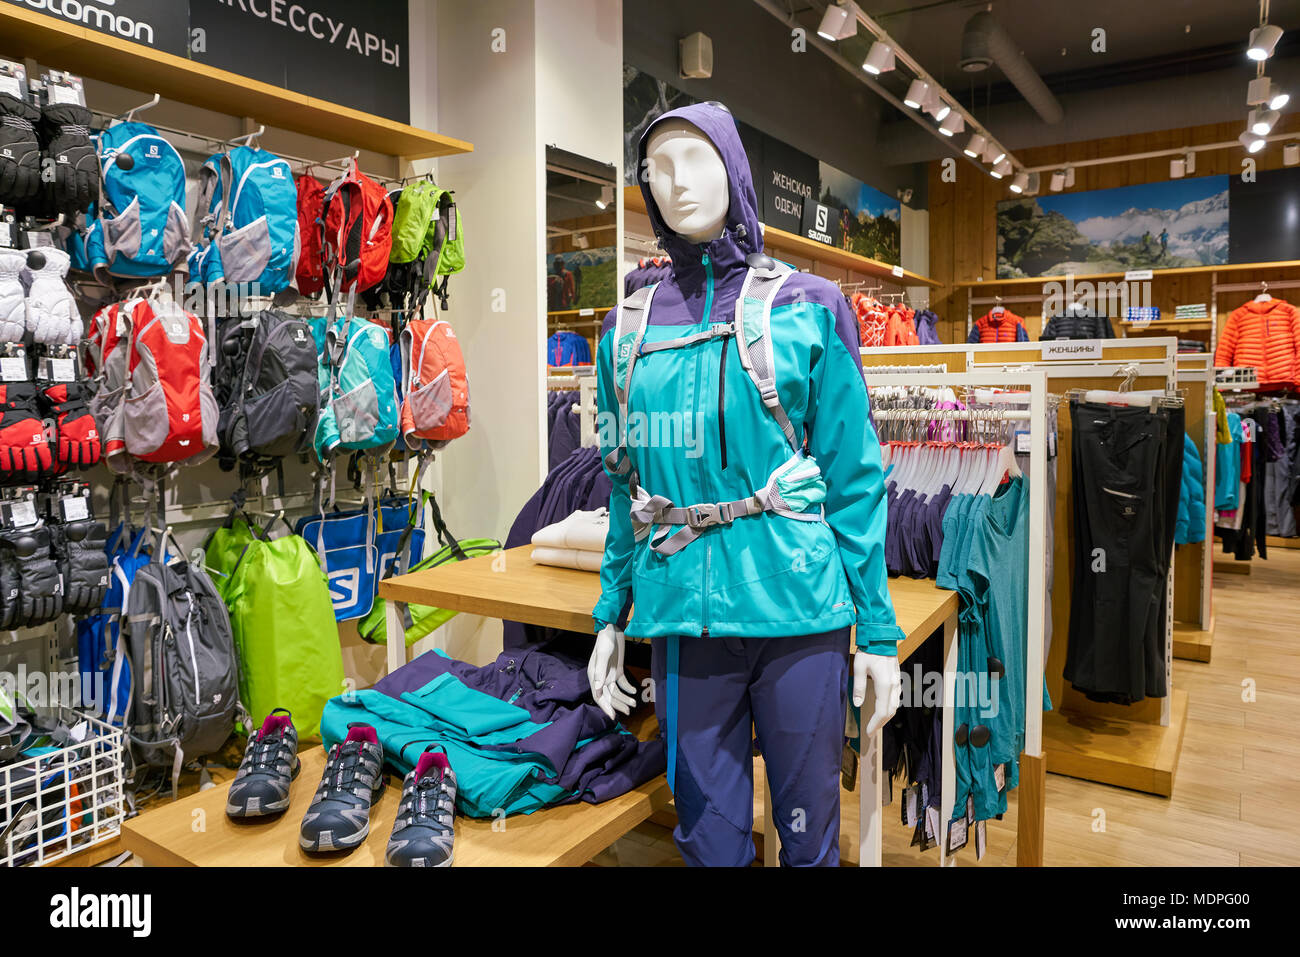 Salomon Outlet Store Clearance, SAVE 40% - stickere-perete.net